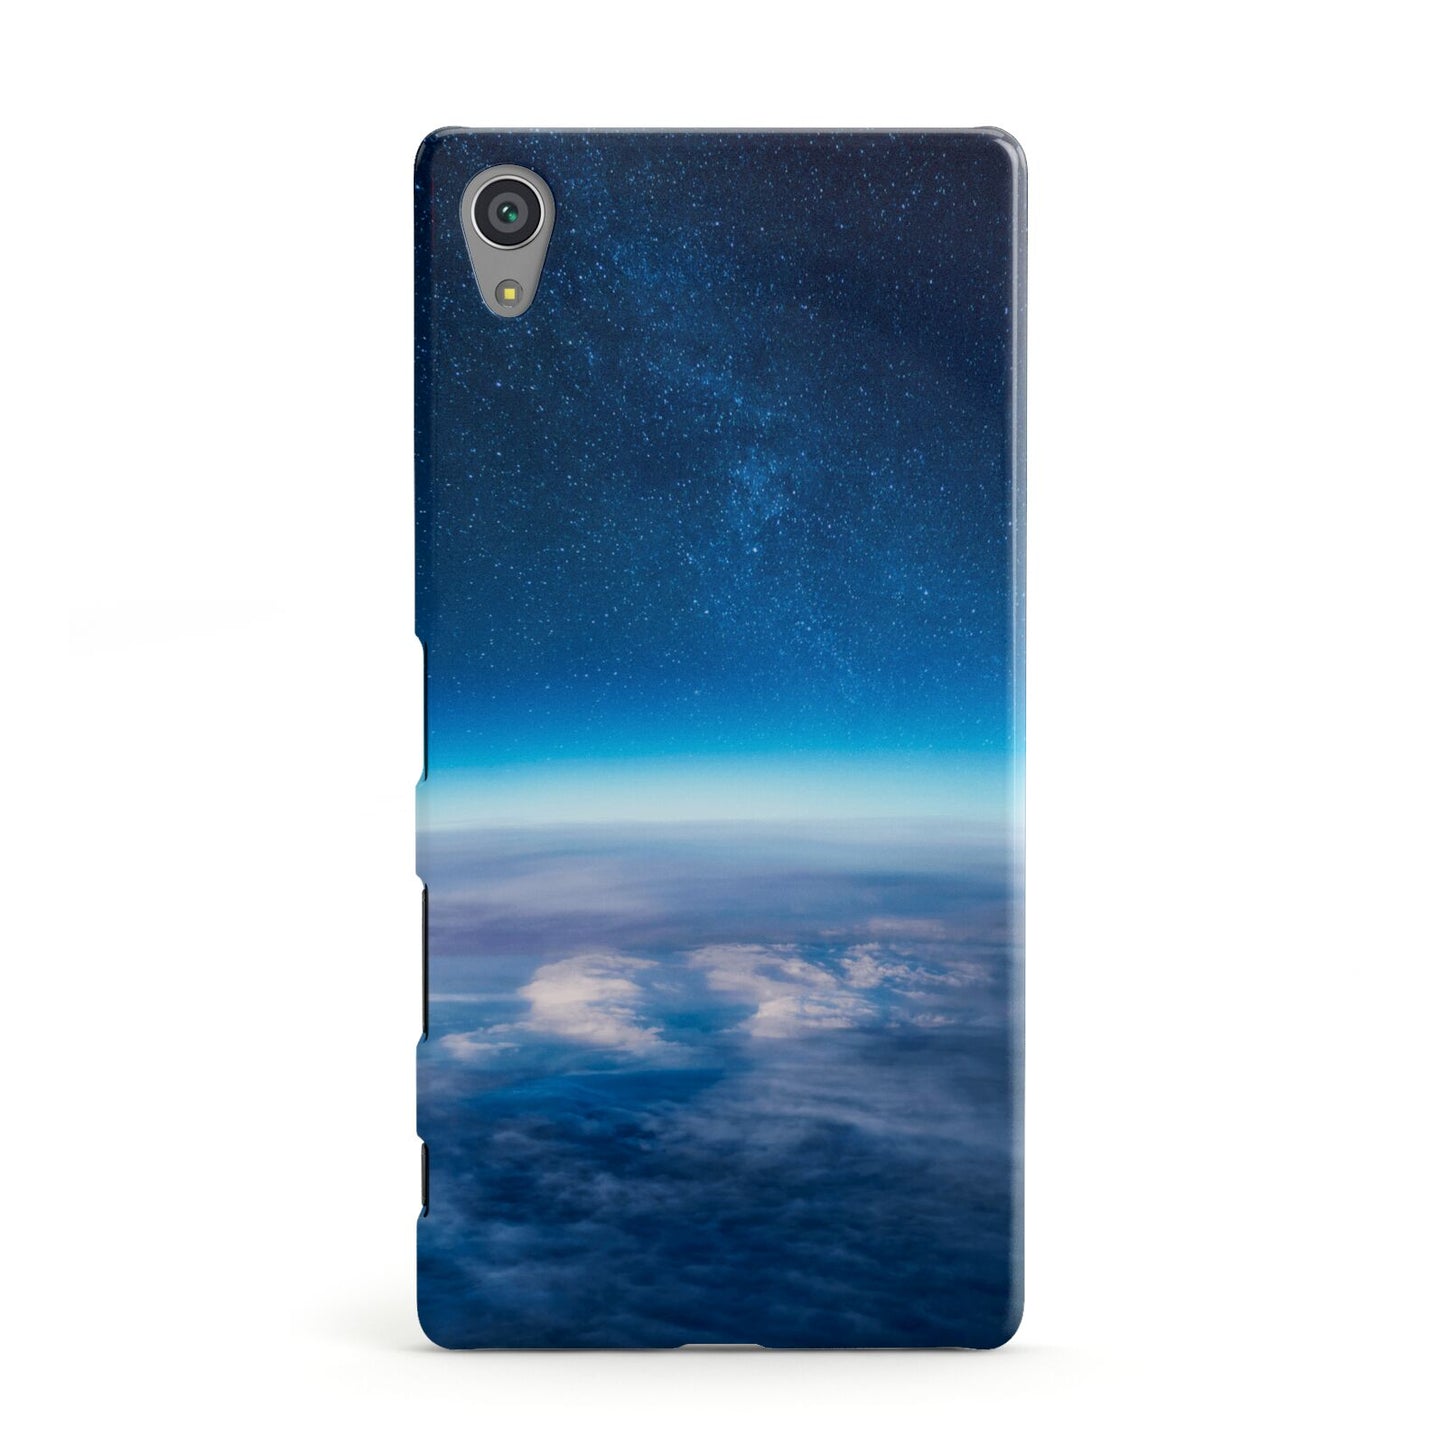 Earth In Space Sony Xperia Case